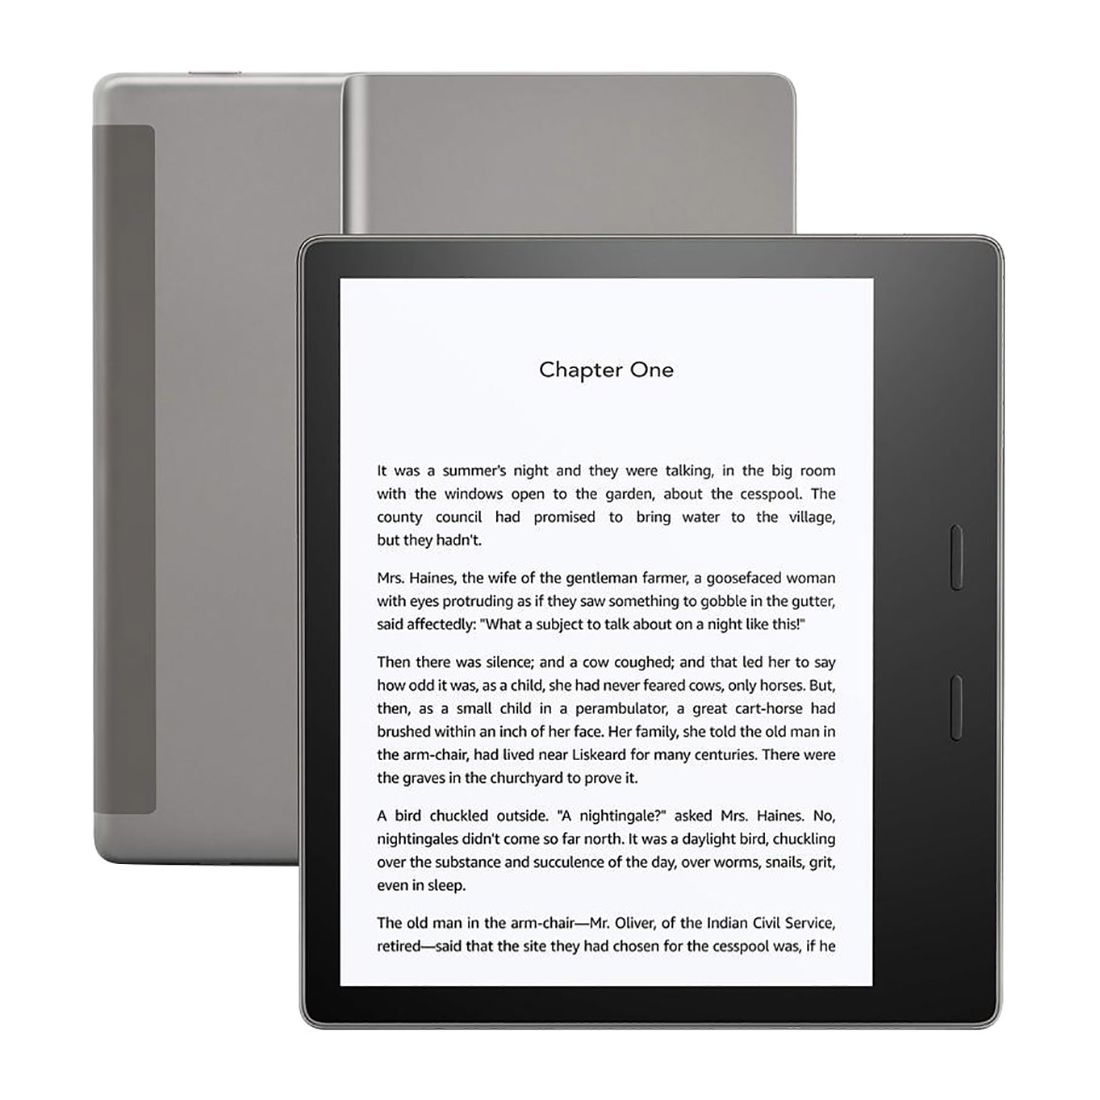 Amazon All-New Kindle Oasis 7 Inch High-Resolution Display Waterproof/32GB/4G LTE+Wi-Fi Tablet (10th Gen)  - Graphite